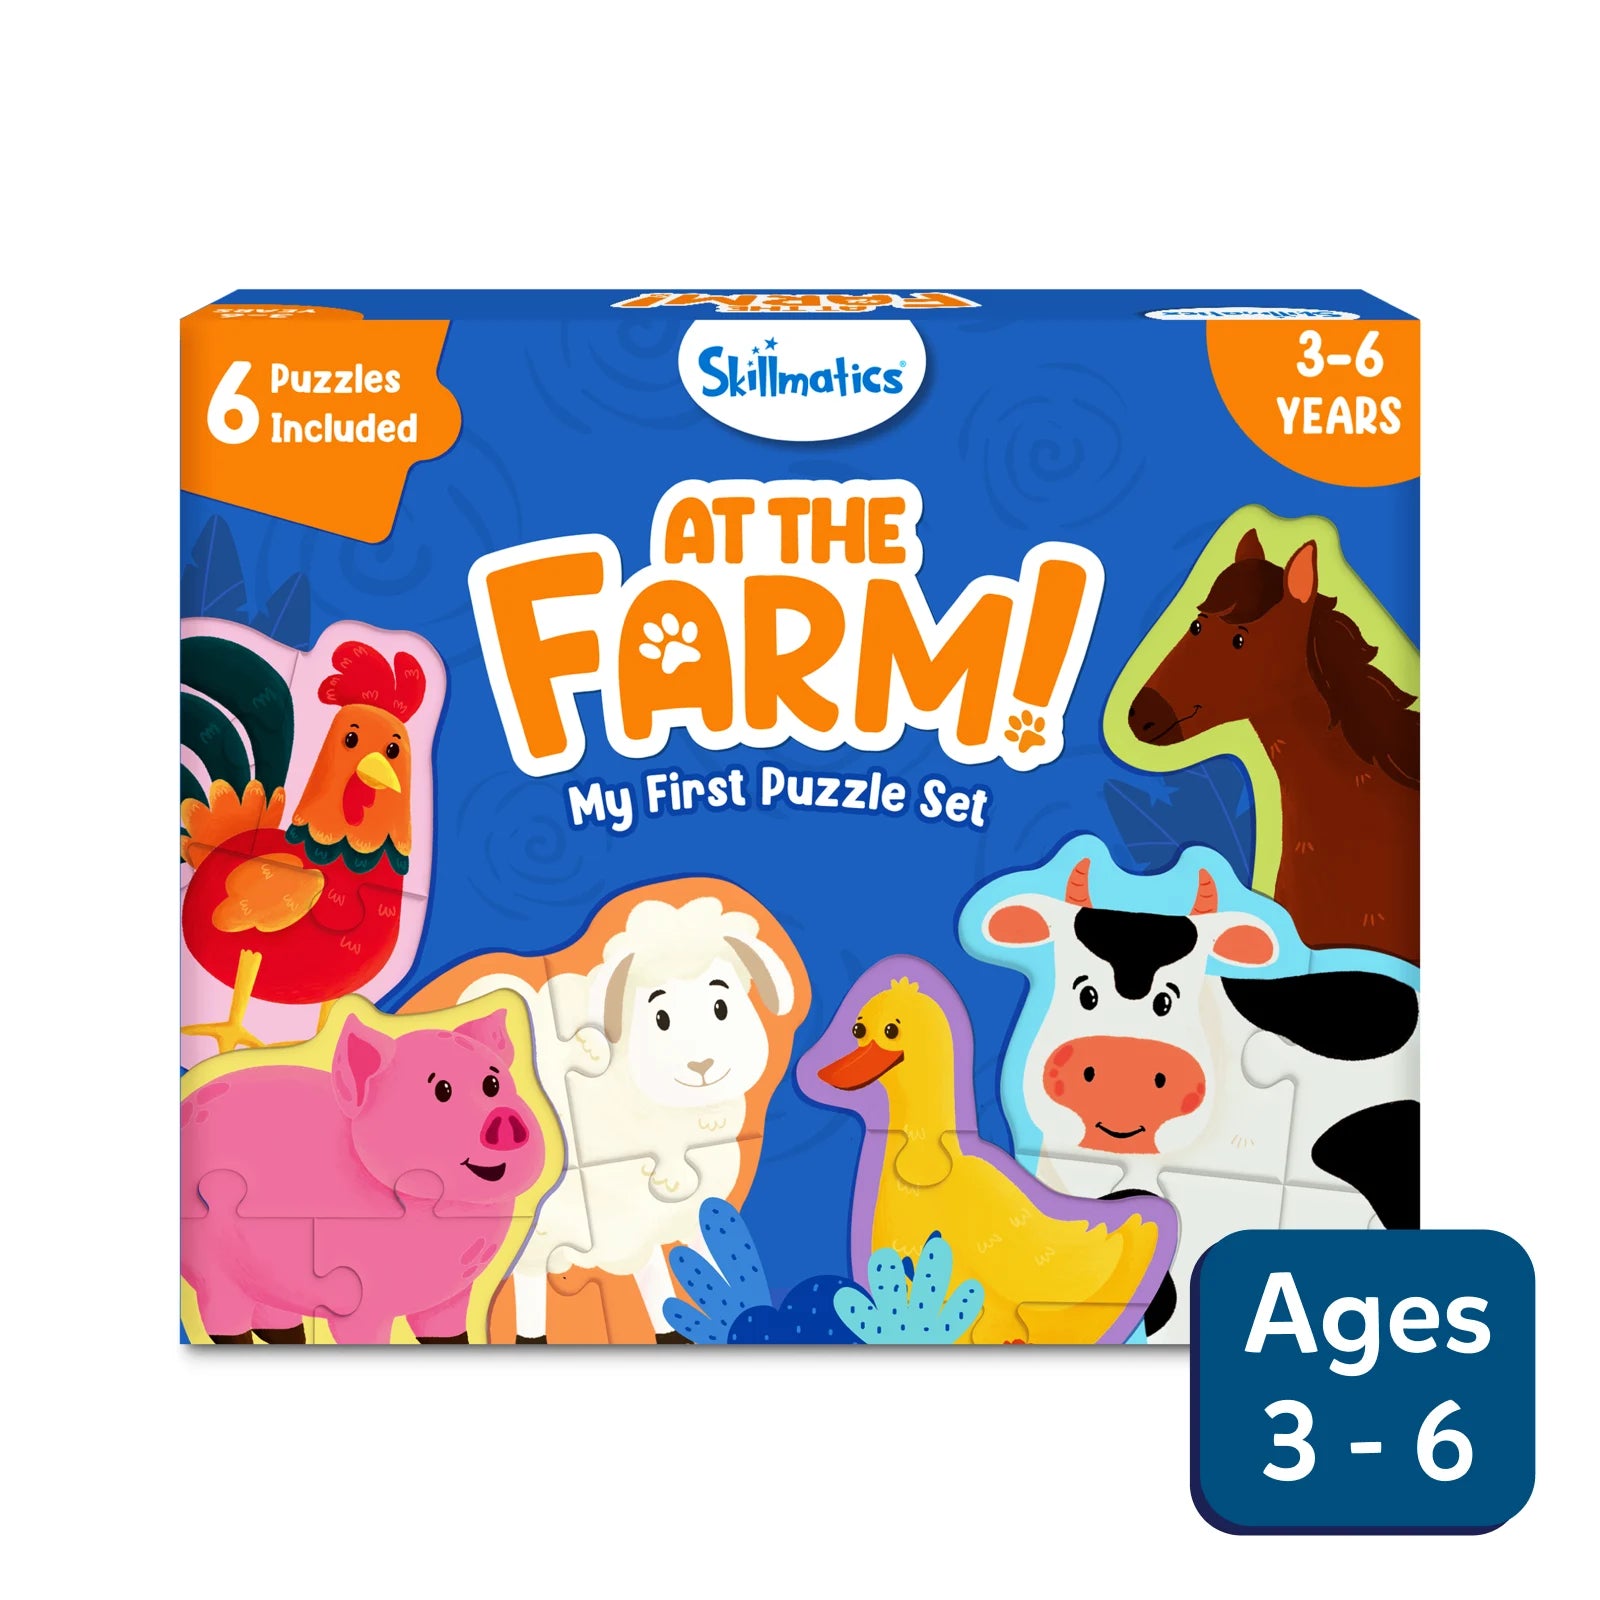 My First Puzzle Set: Farm Animal (ages 3-6)